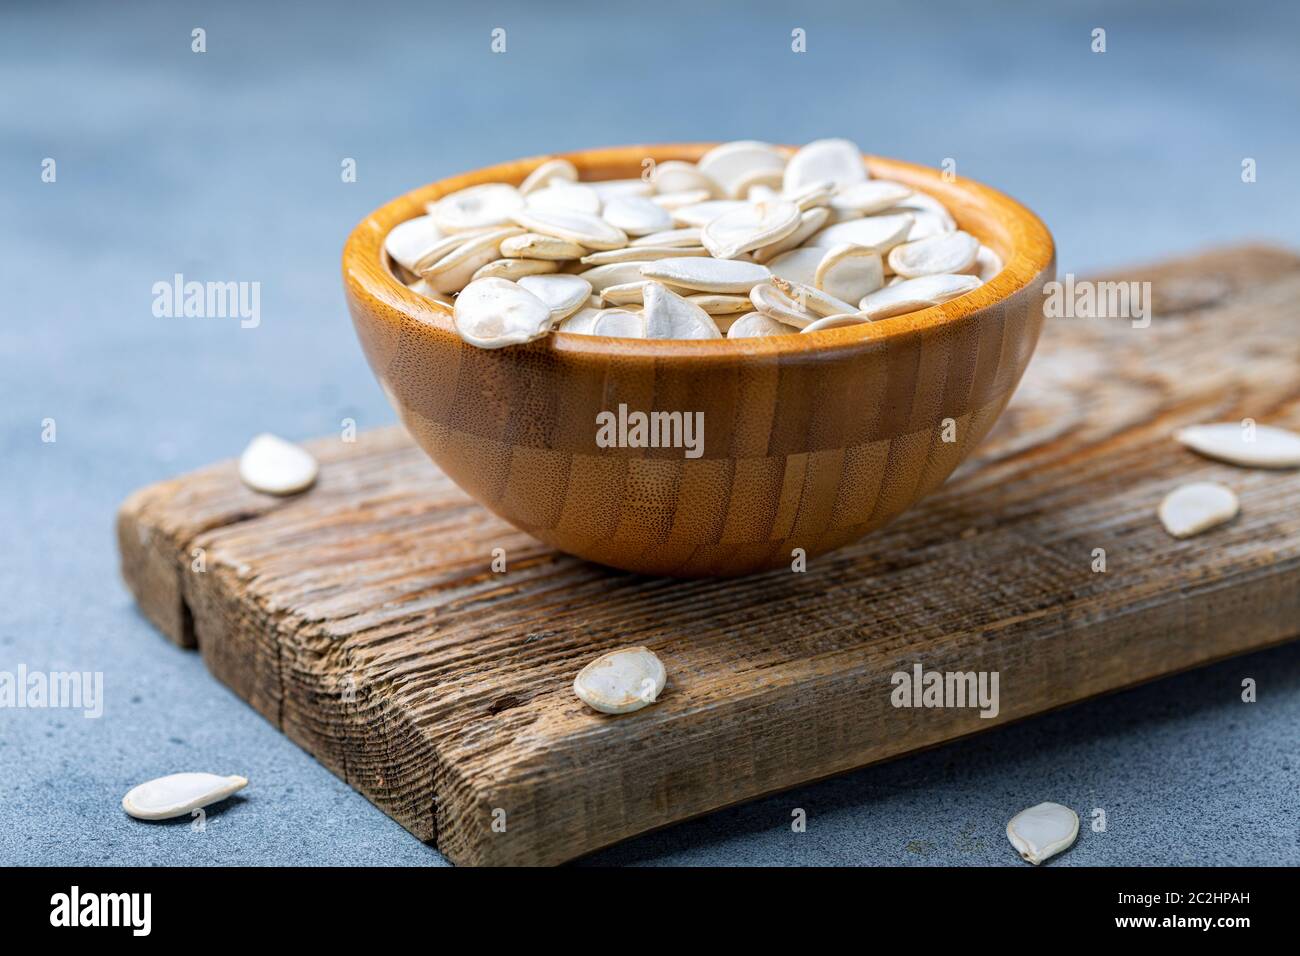 Unpeeled pumpkin seeds in a wooden bowl. Stock Photo